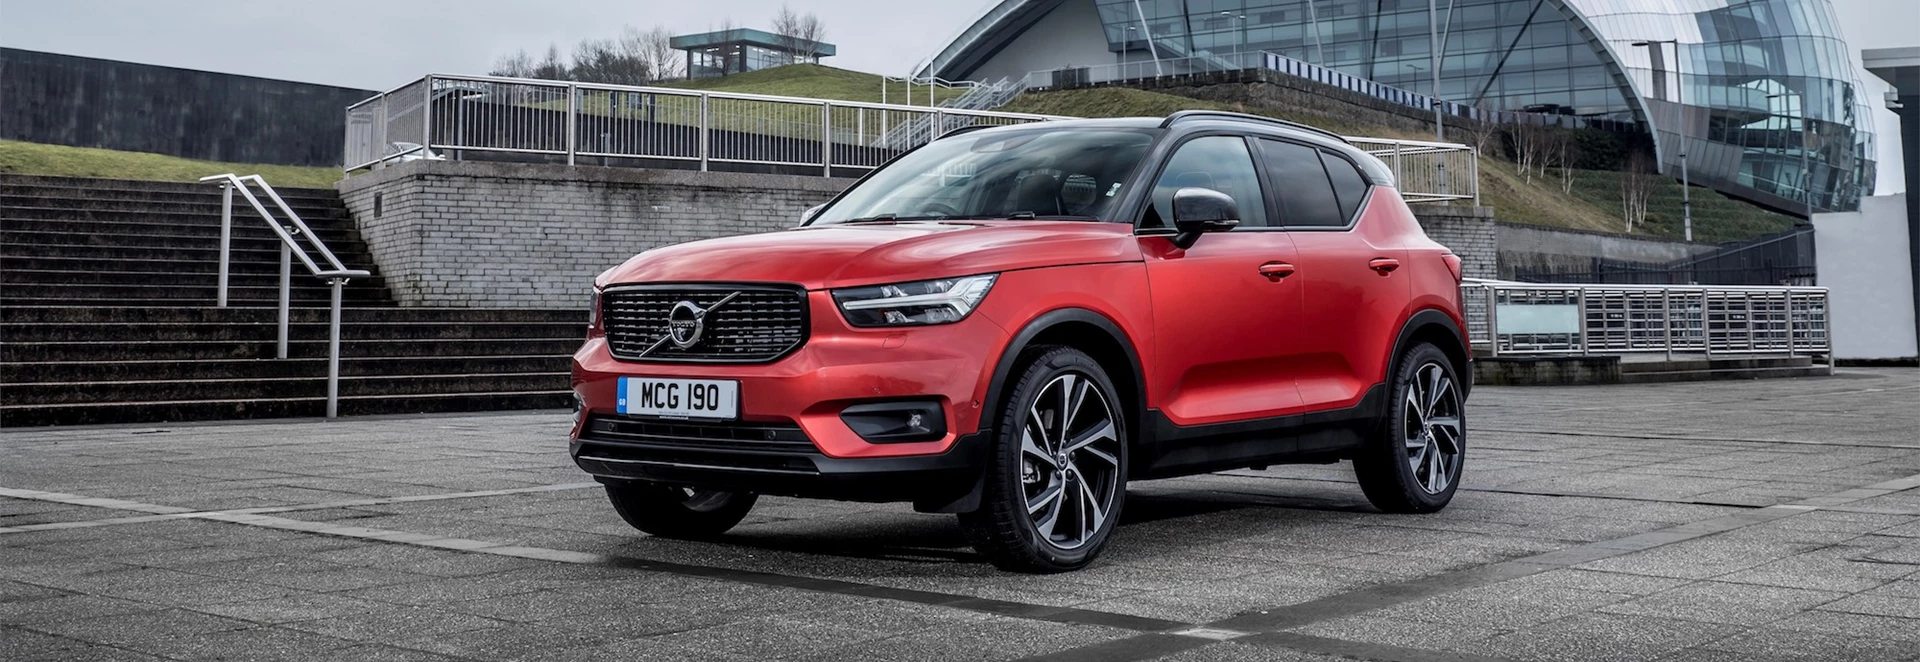 XC40 becomes Volvo’s most successful model from launch